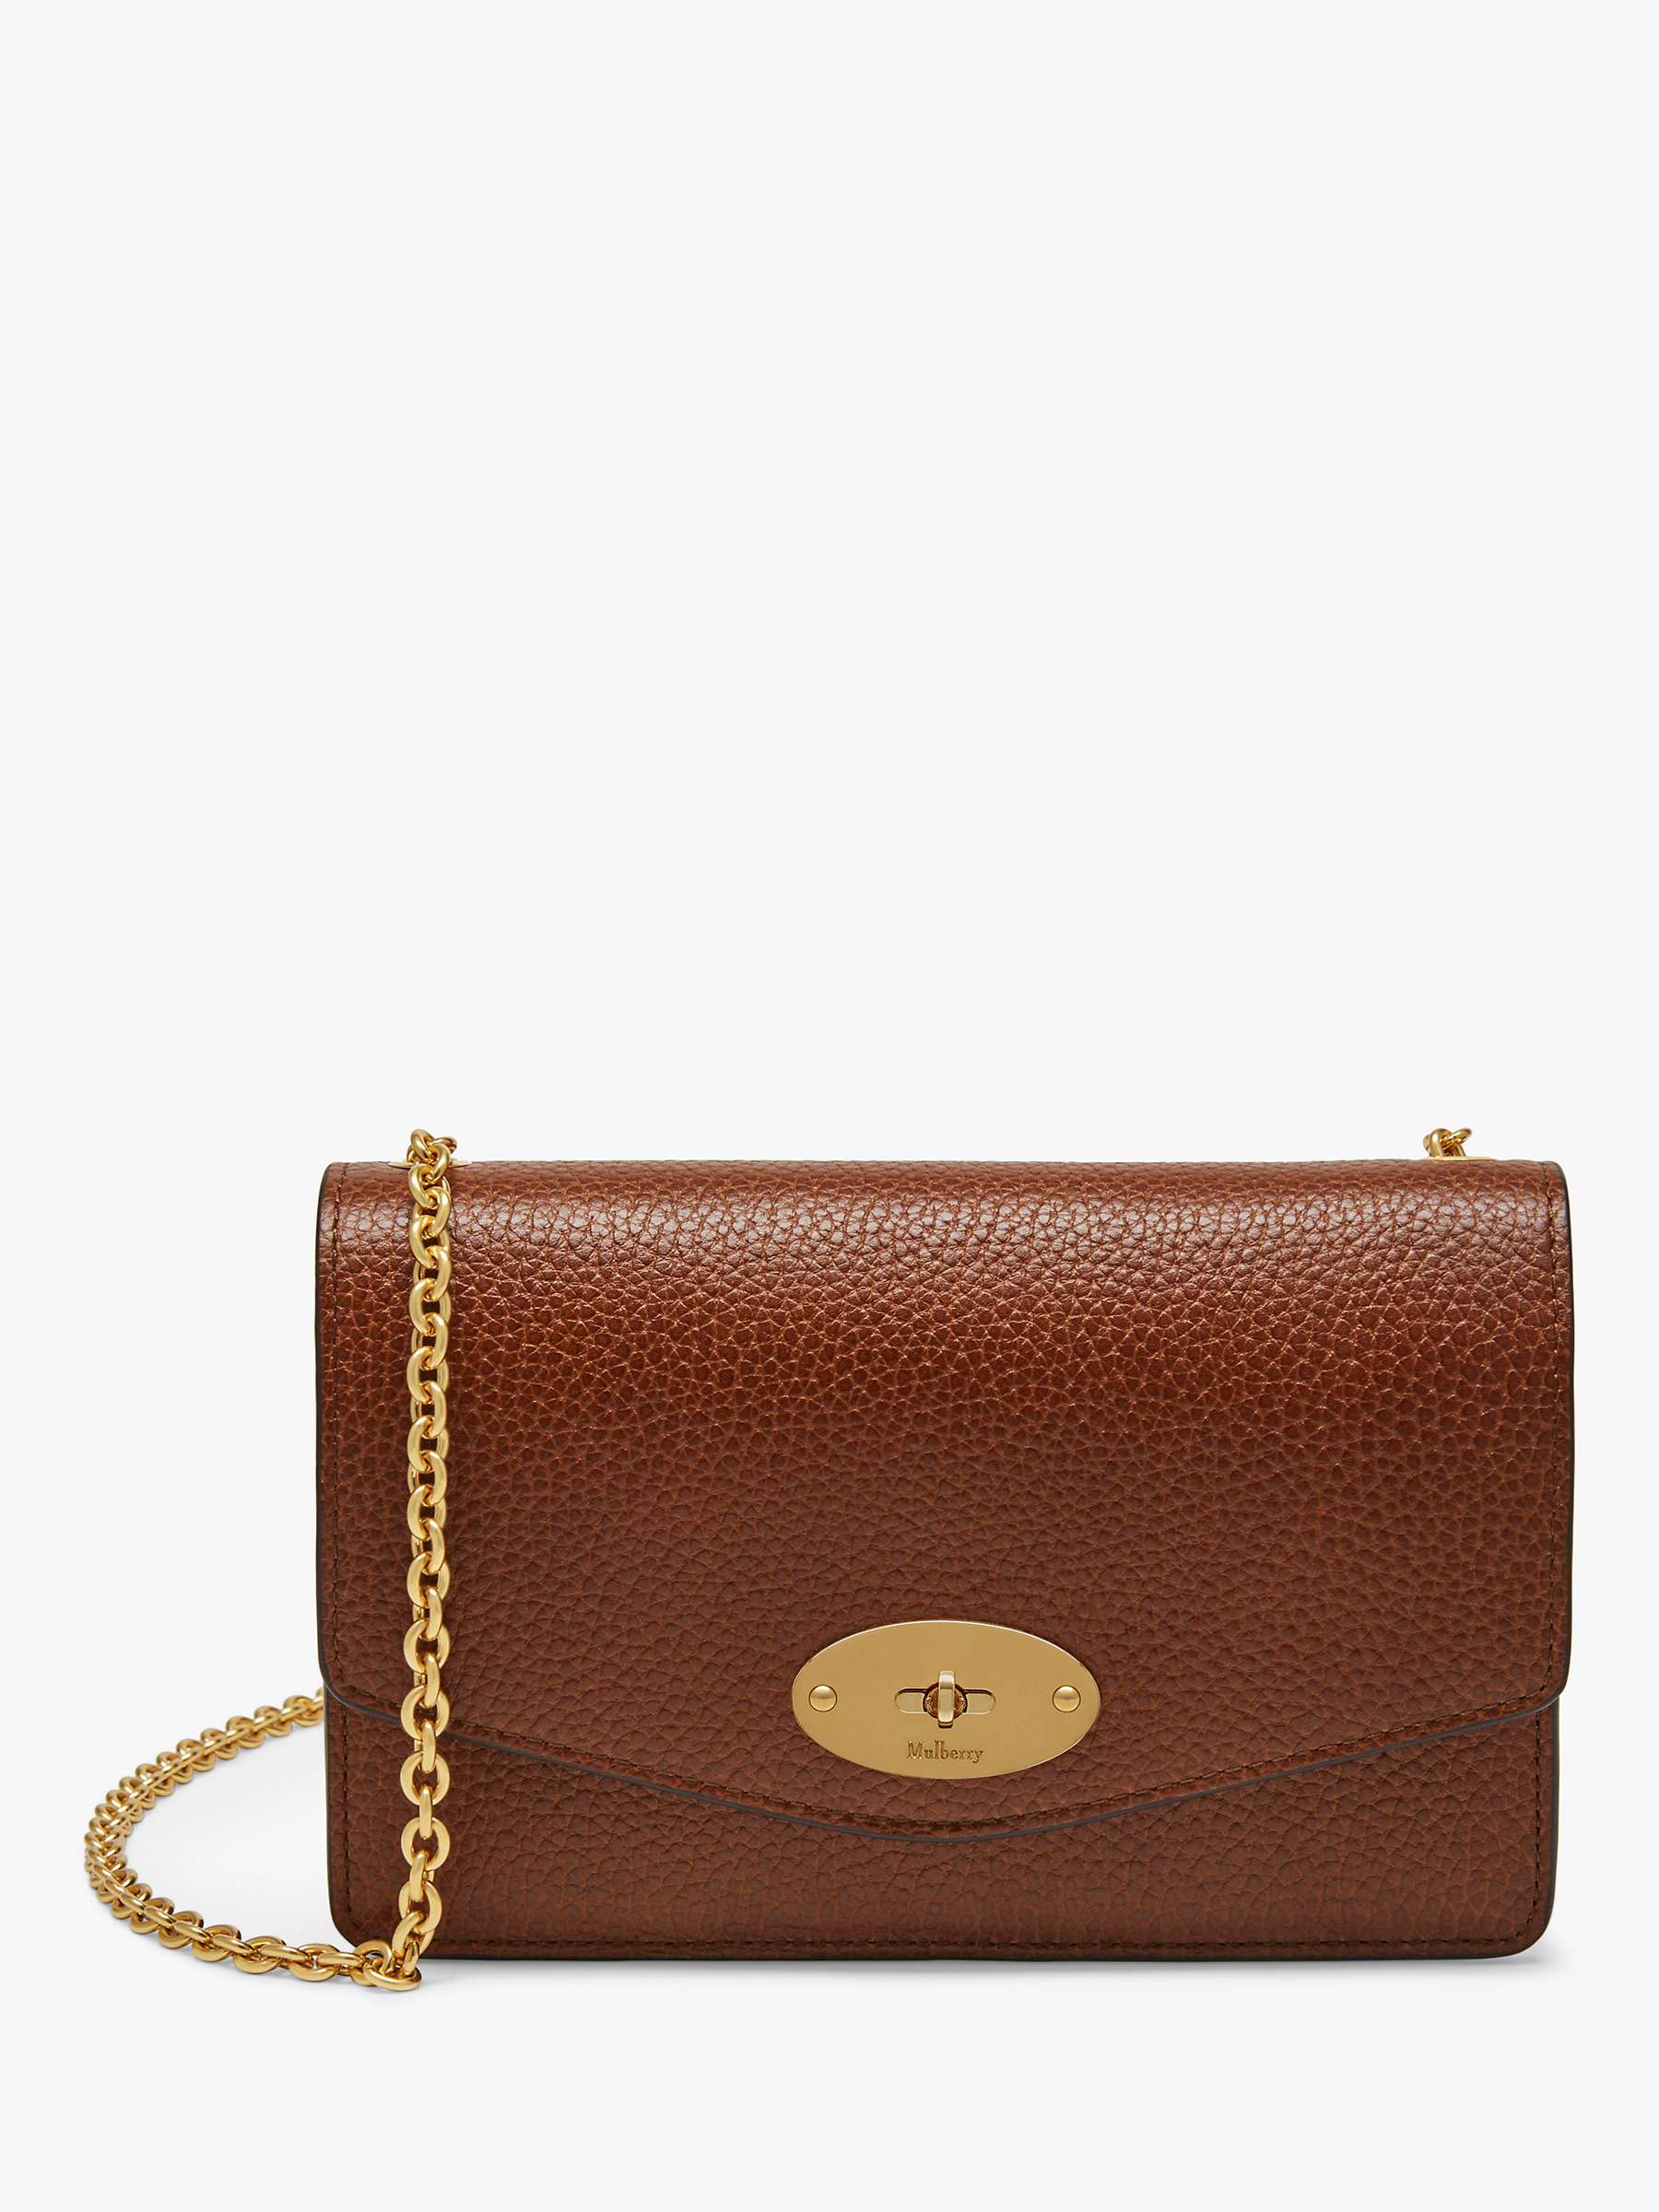 Buy Mulberry Small Darley Small Classic Grain Leather Clutch Bag Online at johnlewis.com